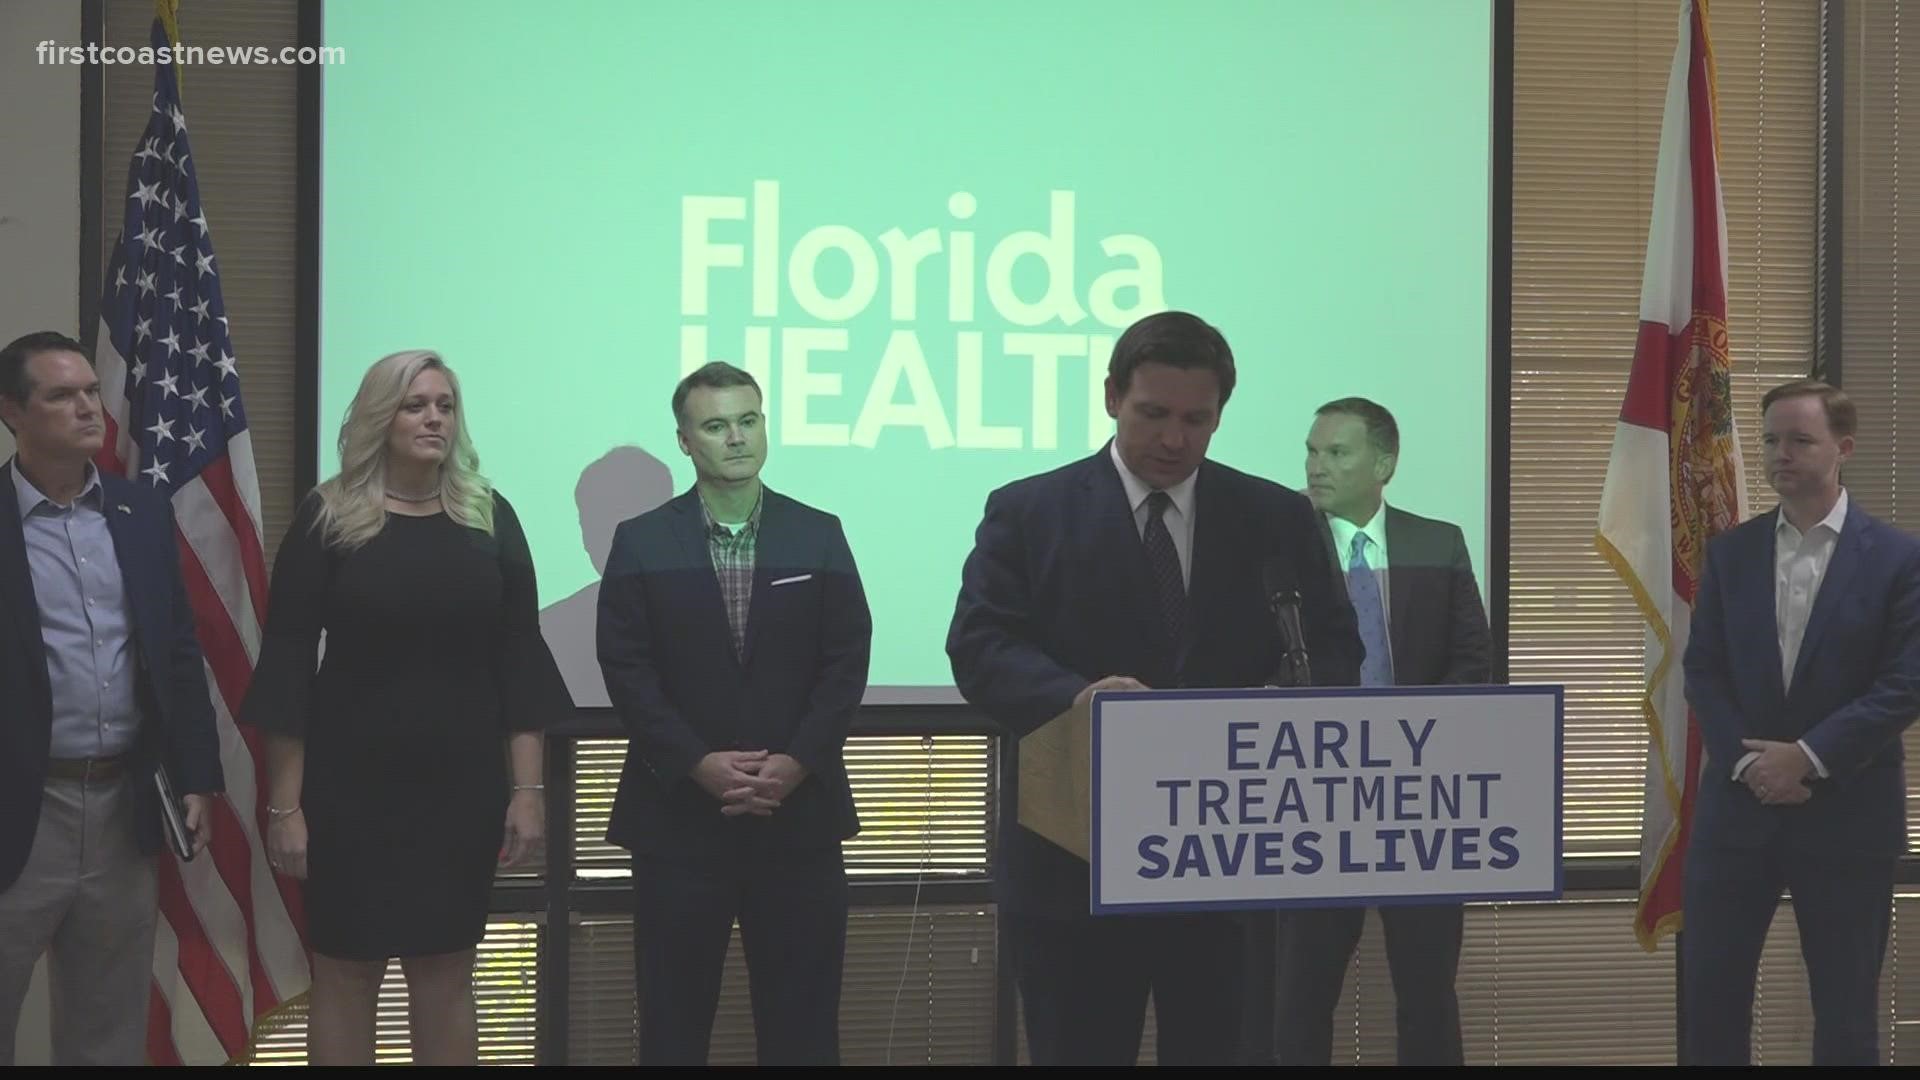 Gov. Ron DeSantis says 30,000 monoclonal antibody treatments have been administered in Florida so far. One woman who got the treatment says it saved her life.